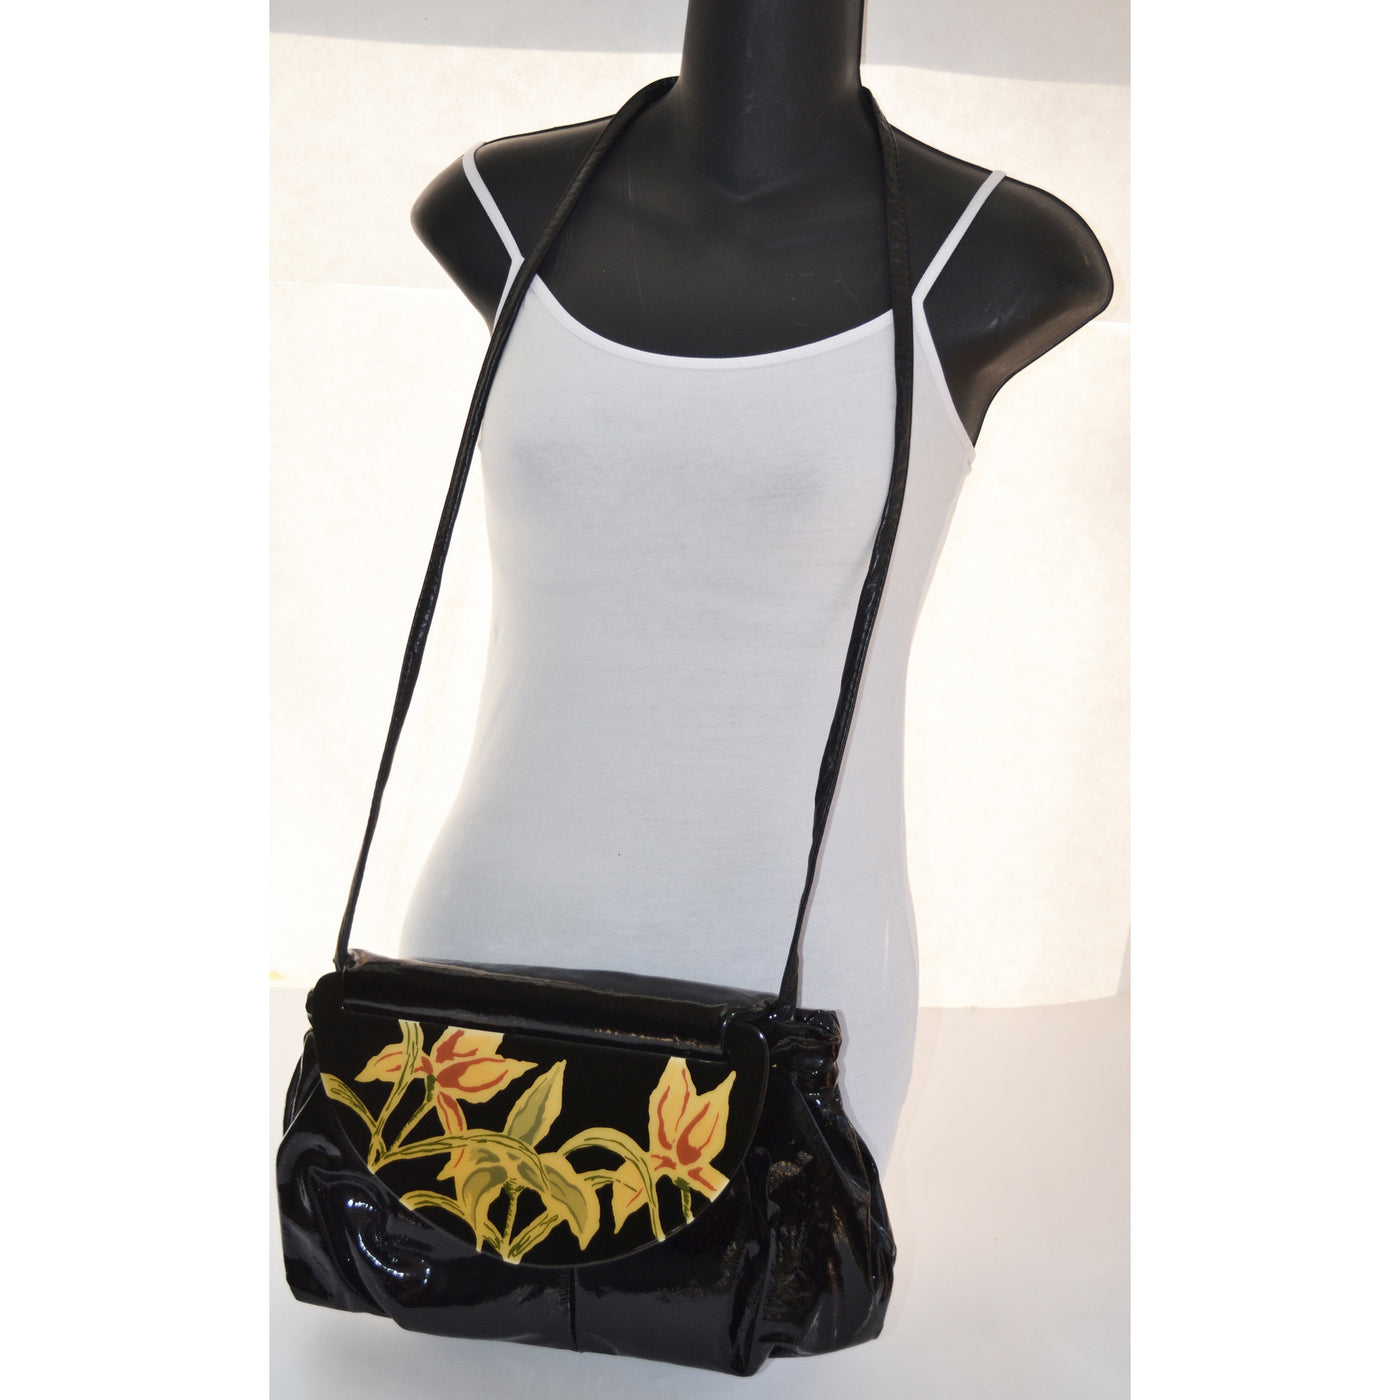 Vintage Black High Gloss Moon Bag & Lacquered Purse By Patricia Smith - 1980's